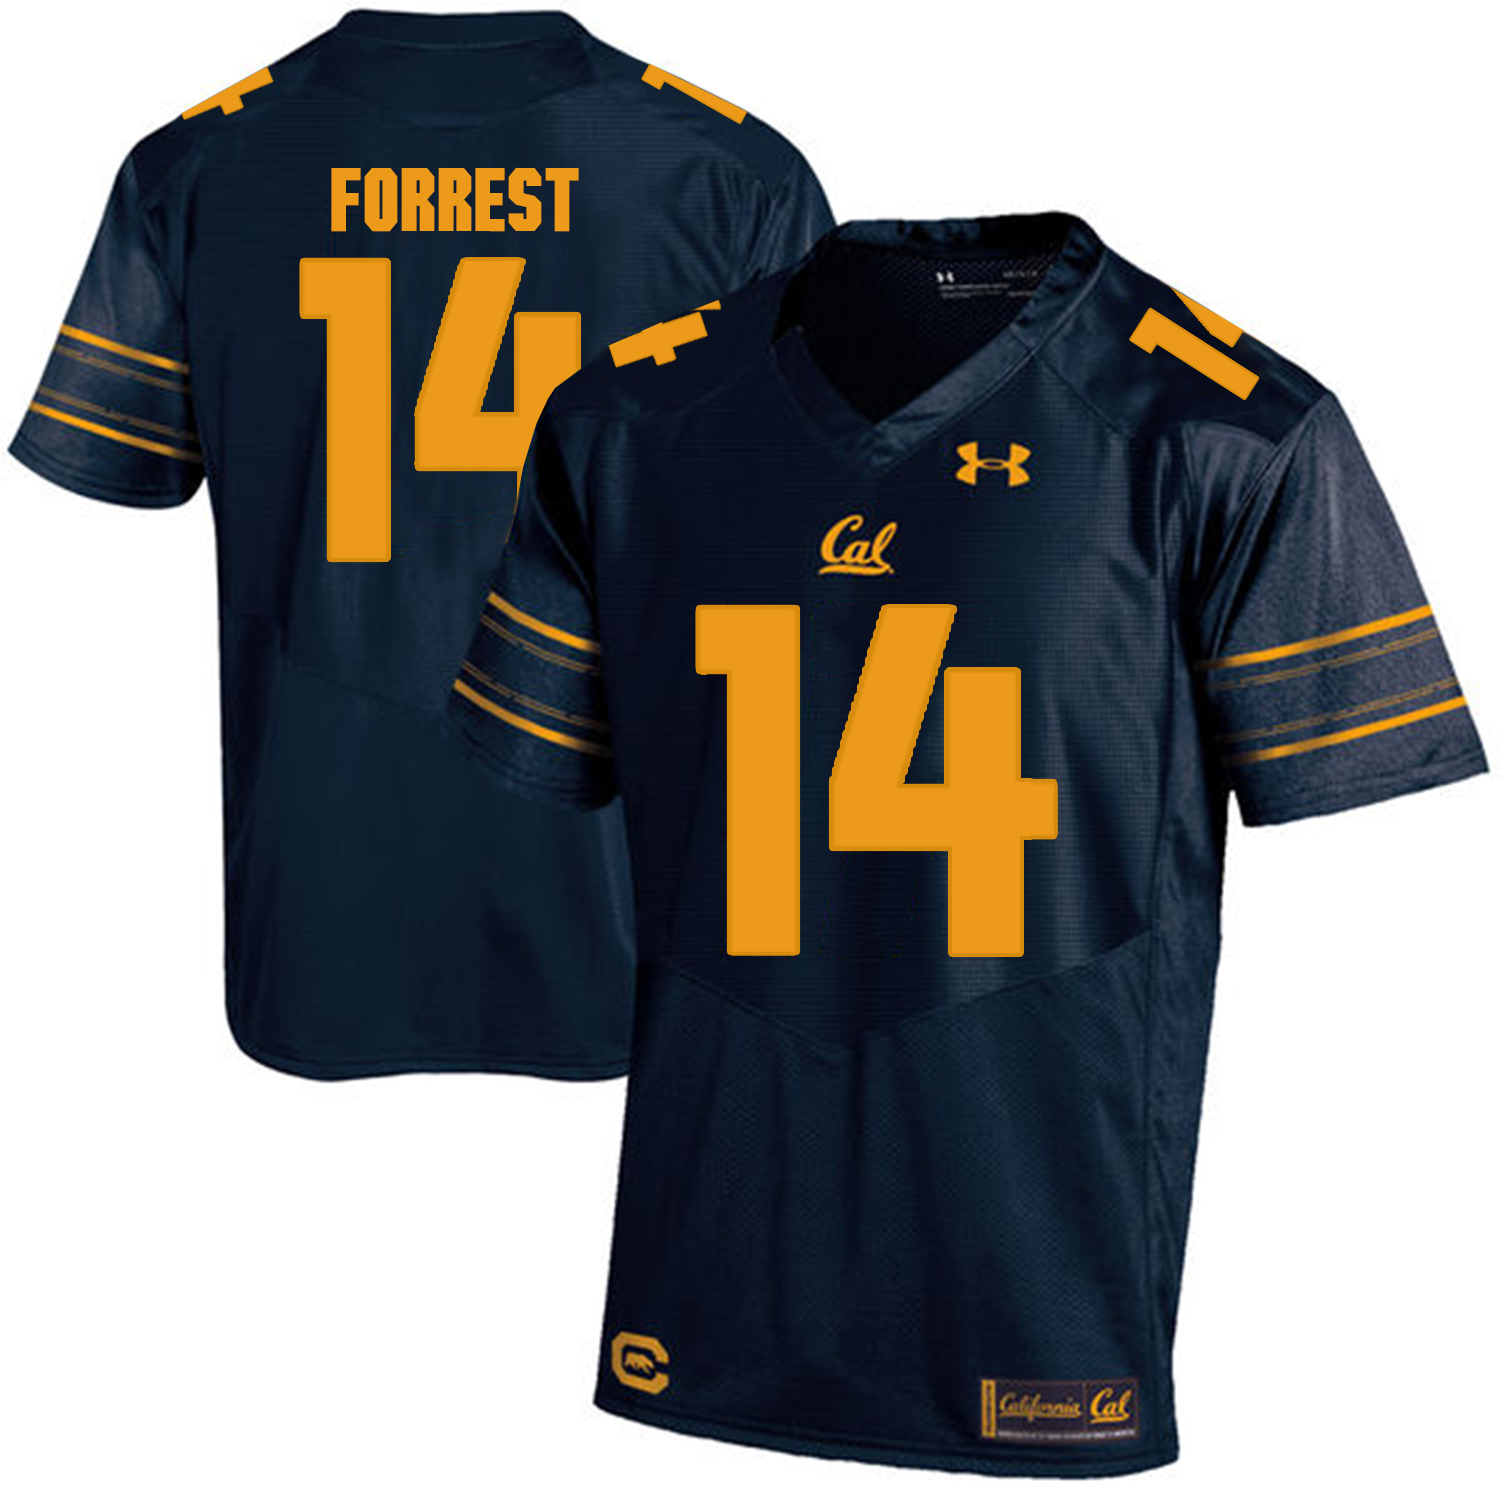 California Golden Bears 14 Chase Forrest Navy College Football Jersey